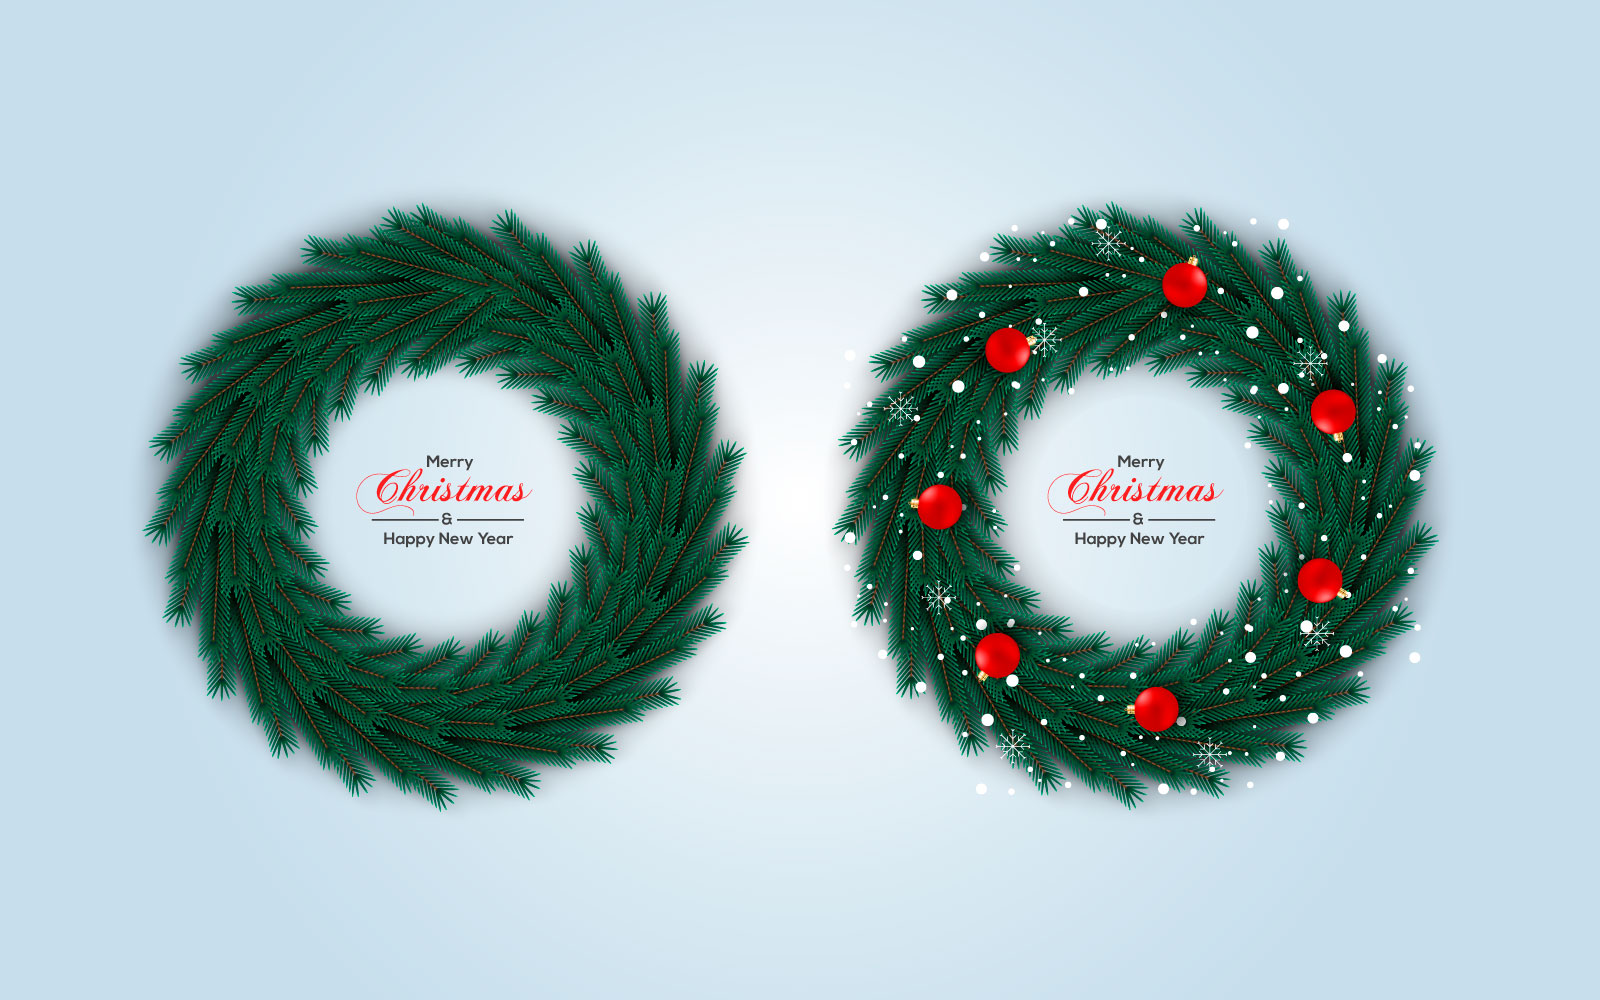 Christmas wreath vector  design. merry christmas text in grass wreath element with leaves concept